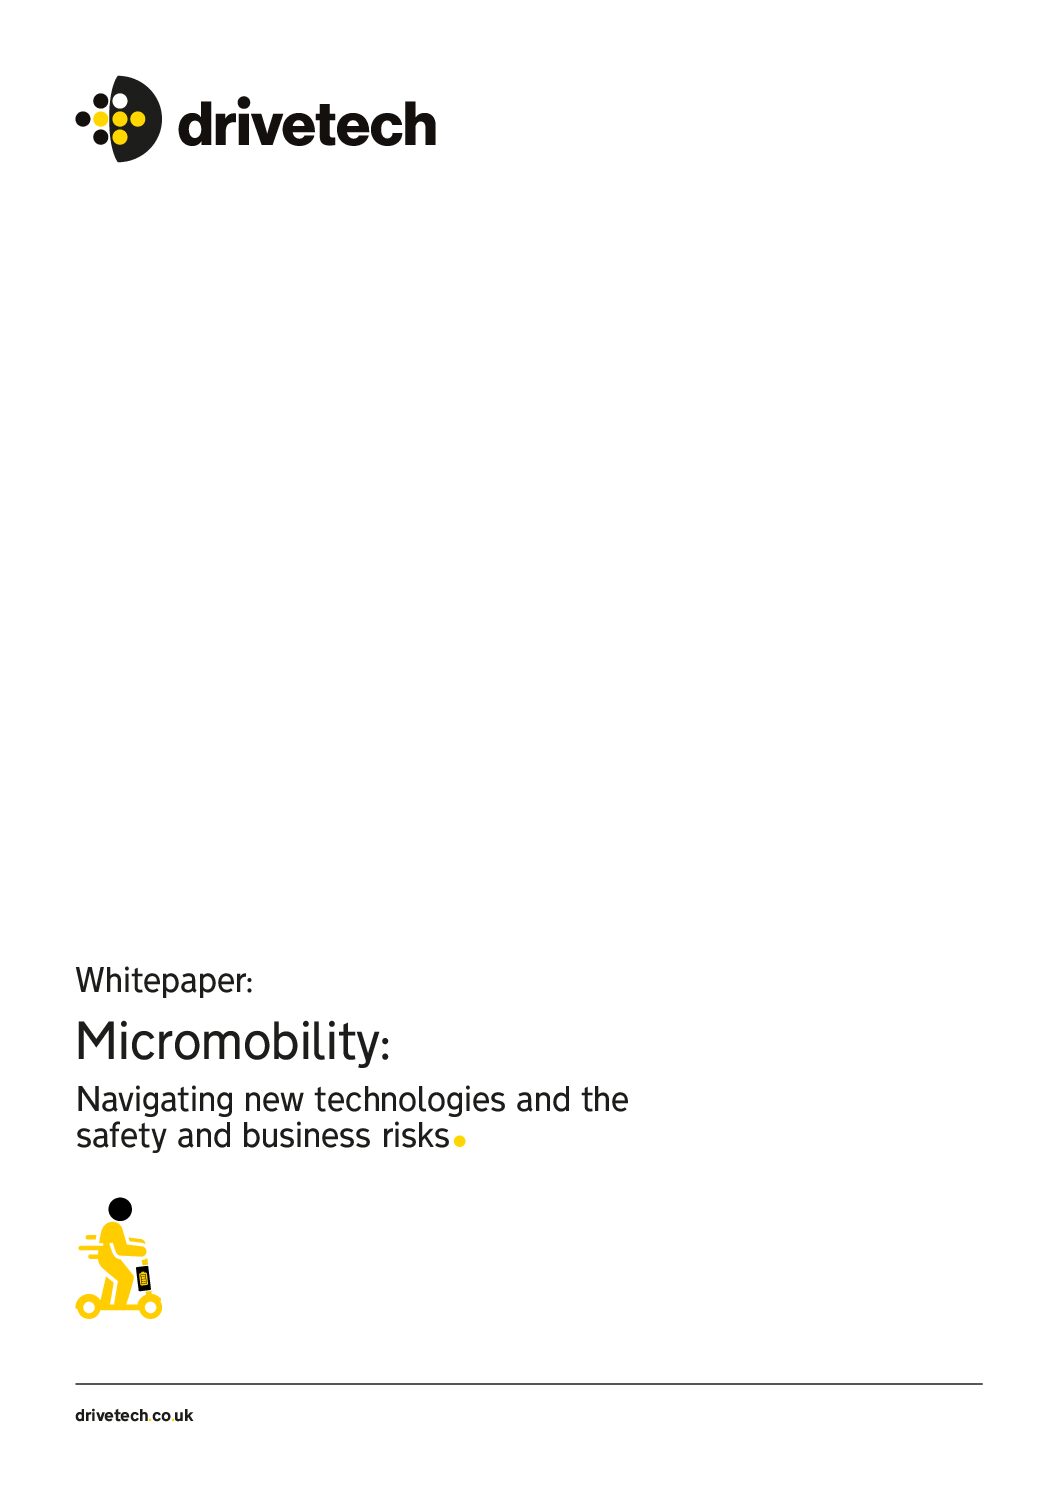 Whitepaper – Micromobility